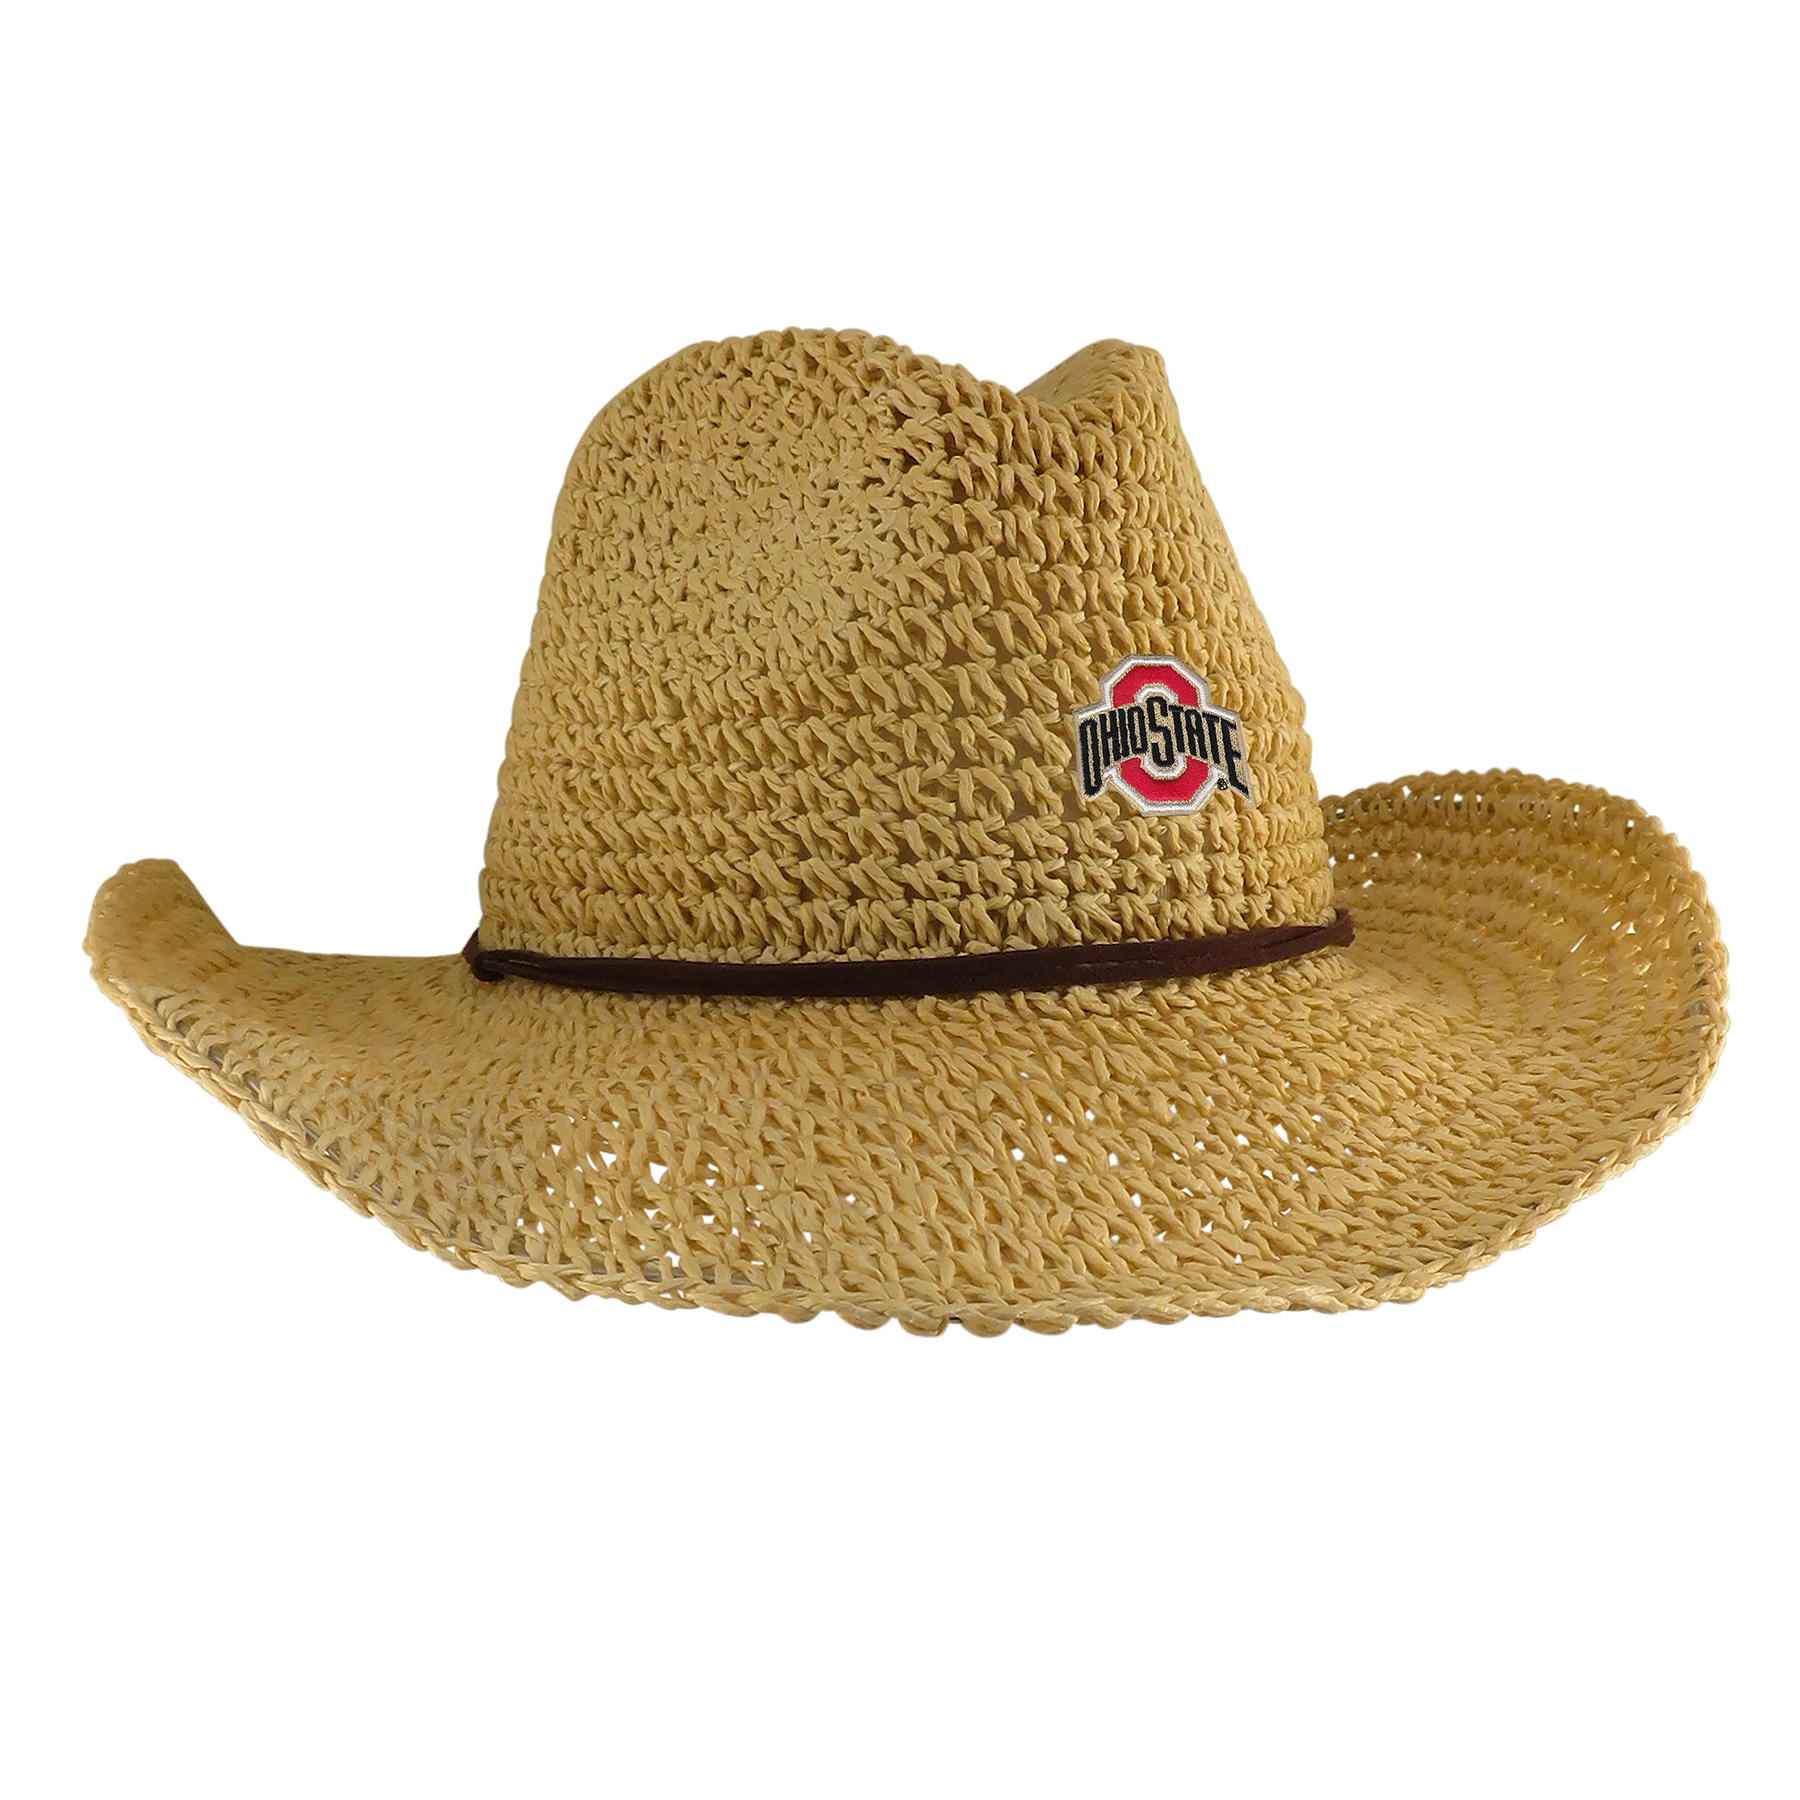 OHIO STATE SAHARA -CRUSHABLE COWBOY HAT WITH BRAIDED LEATHER CORDS